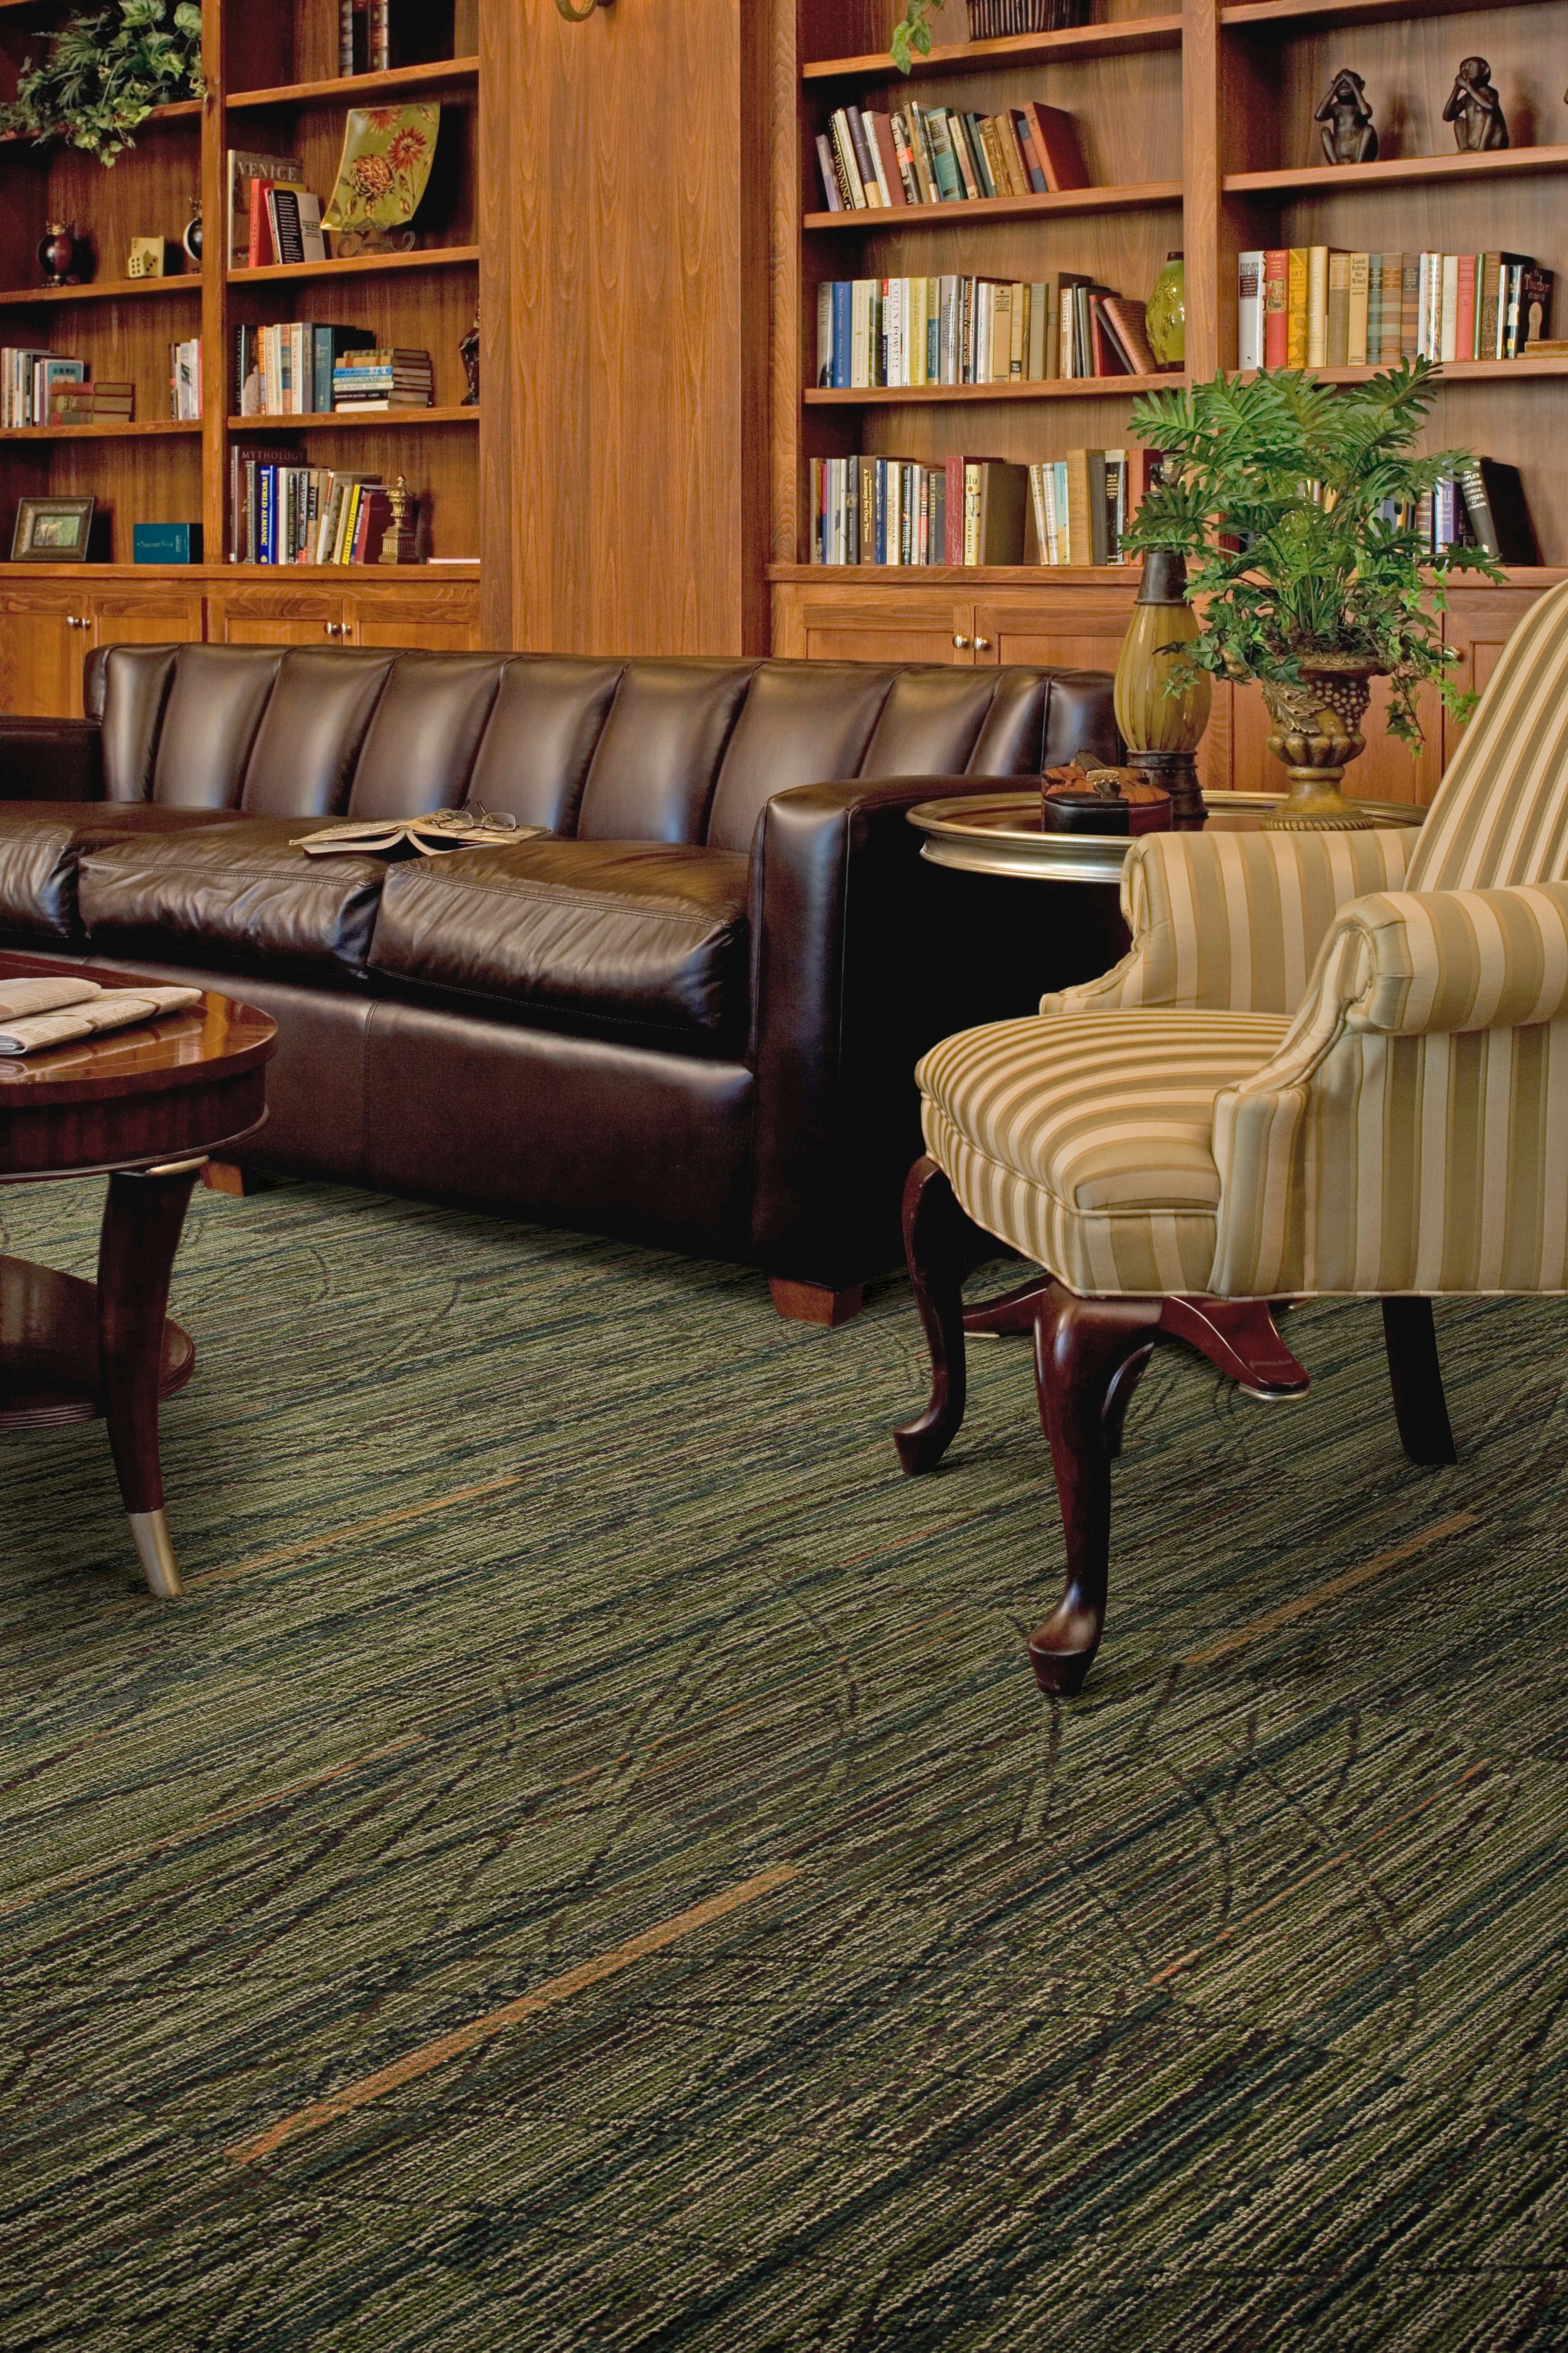 Interface Prairie Grass carpet tile in senior housing seating area with leather sofa and bookshelves imagen número 6